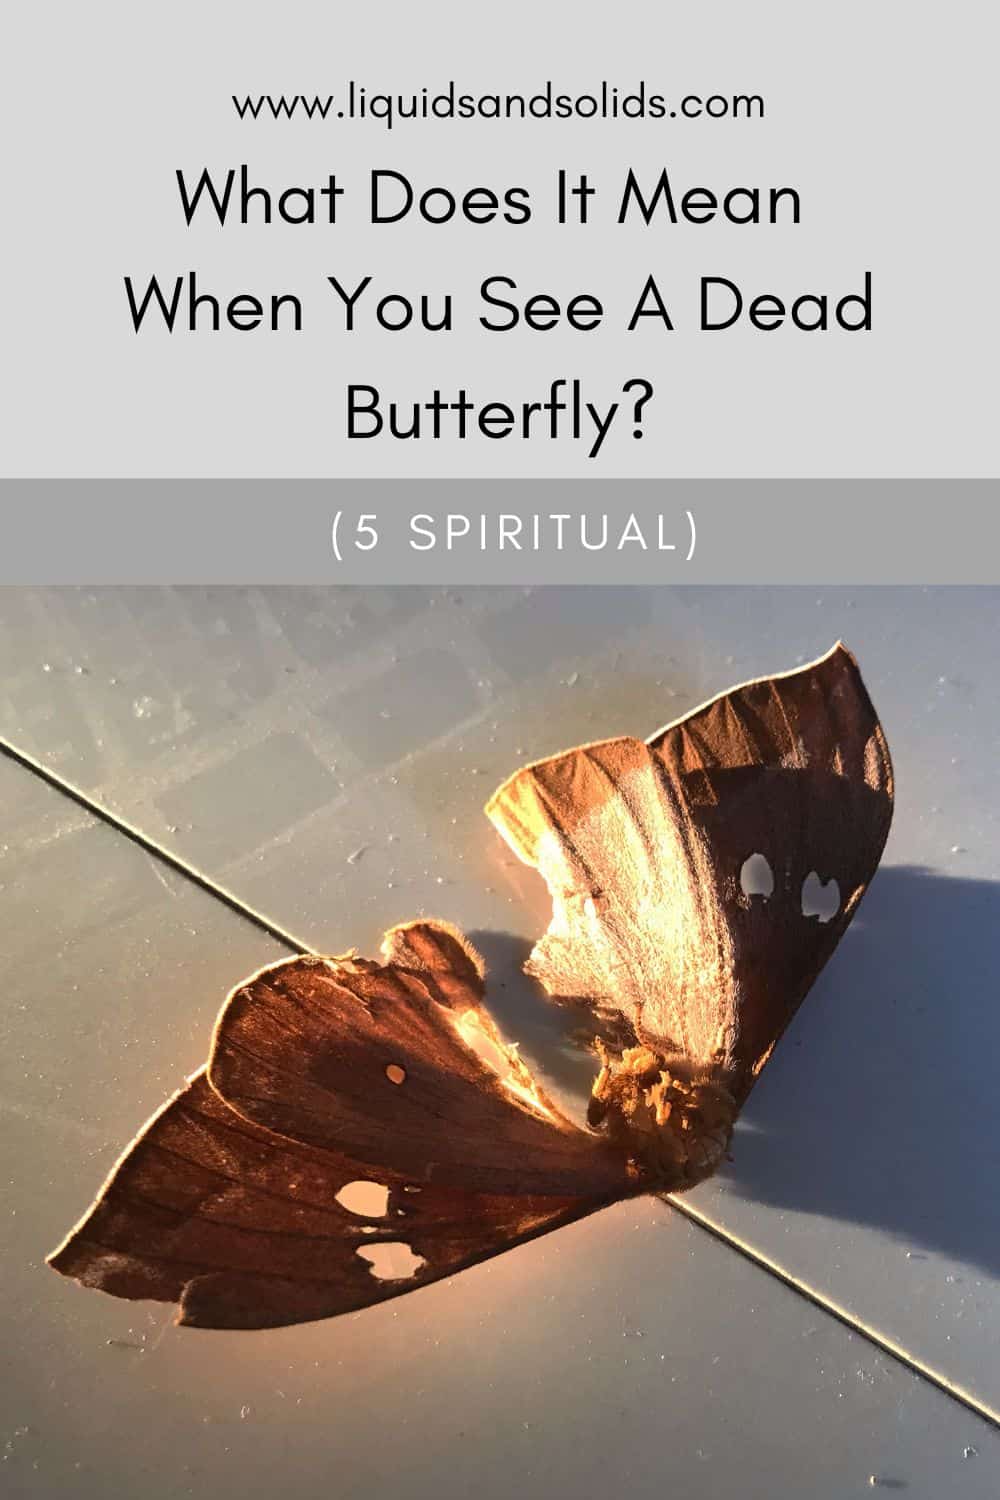 What Does It Mean When You See A Dead Butterfly? (5 Spiritual Meanings)